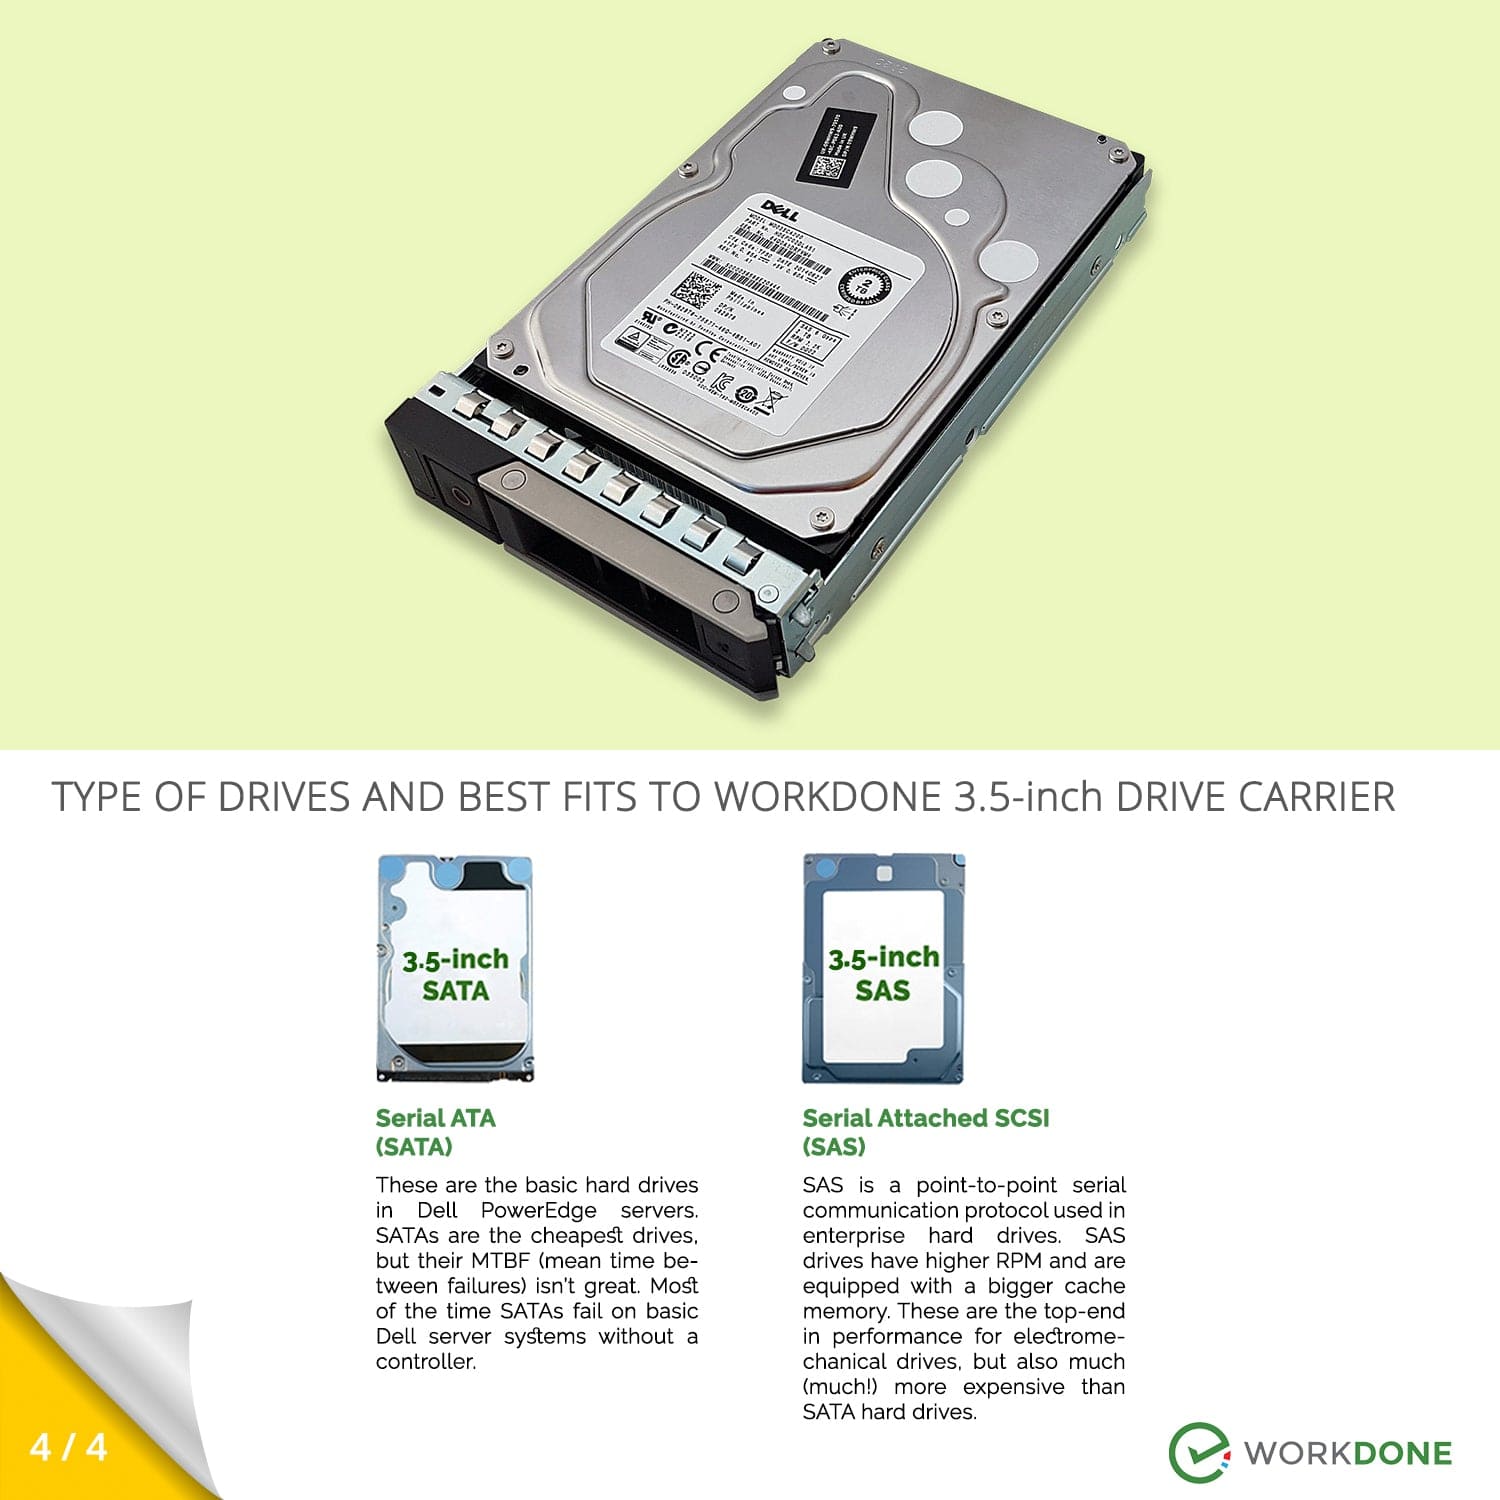 WORKDONE 2-Pack 3.5 inch Drive Caddy for R6415 R7415 R7425 Servers